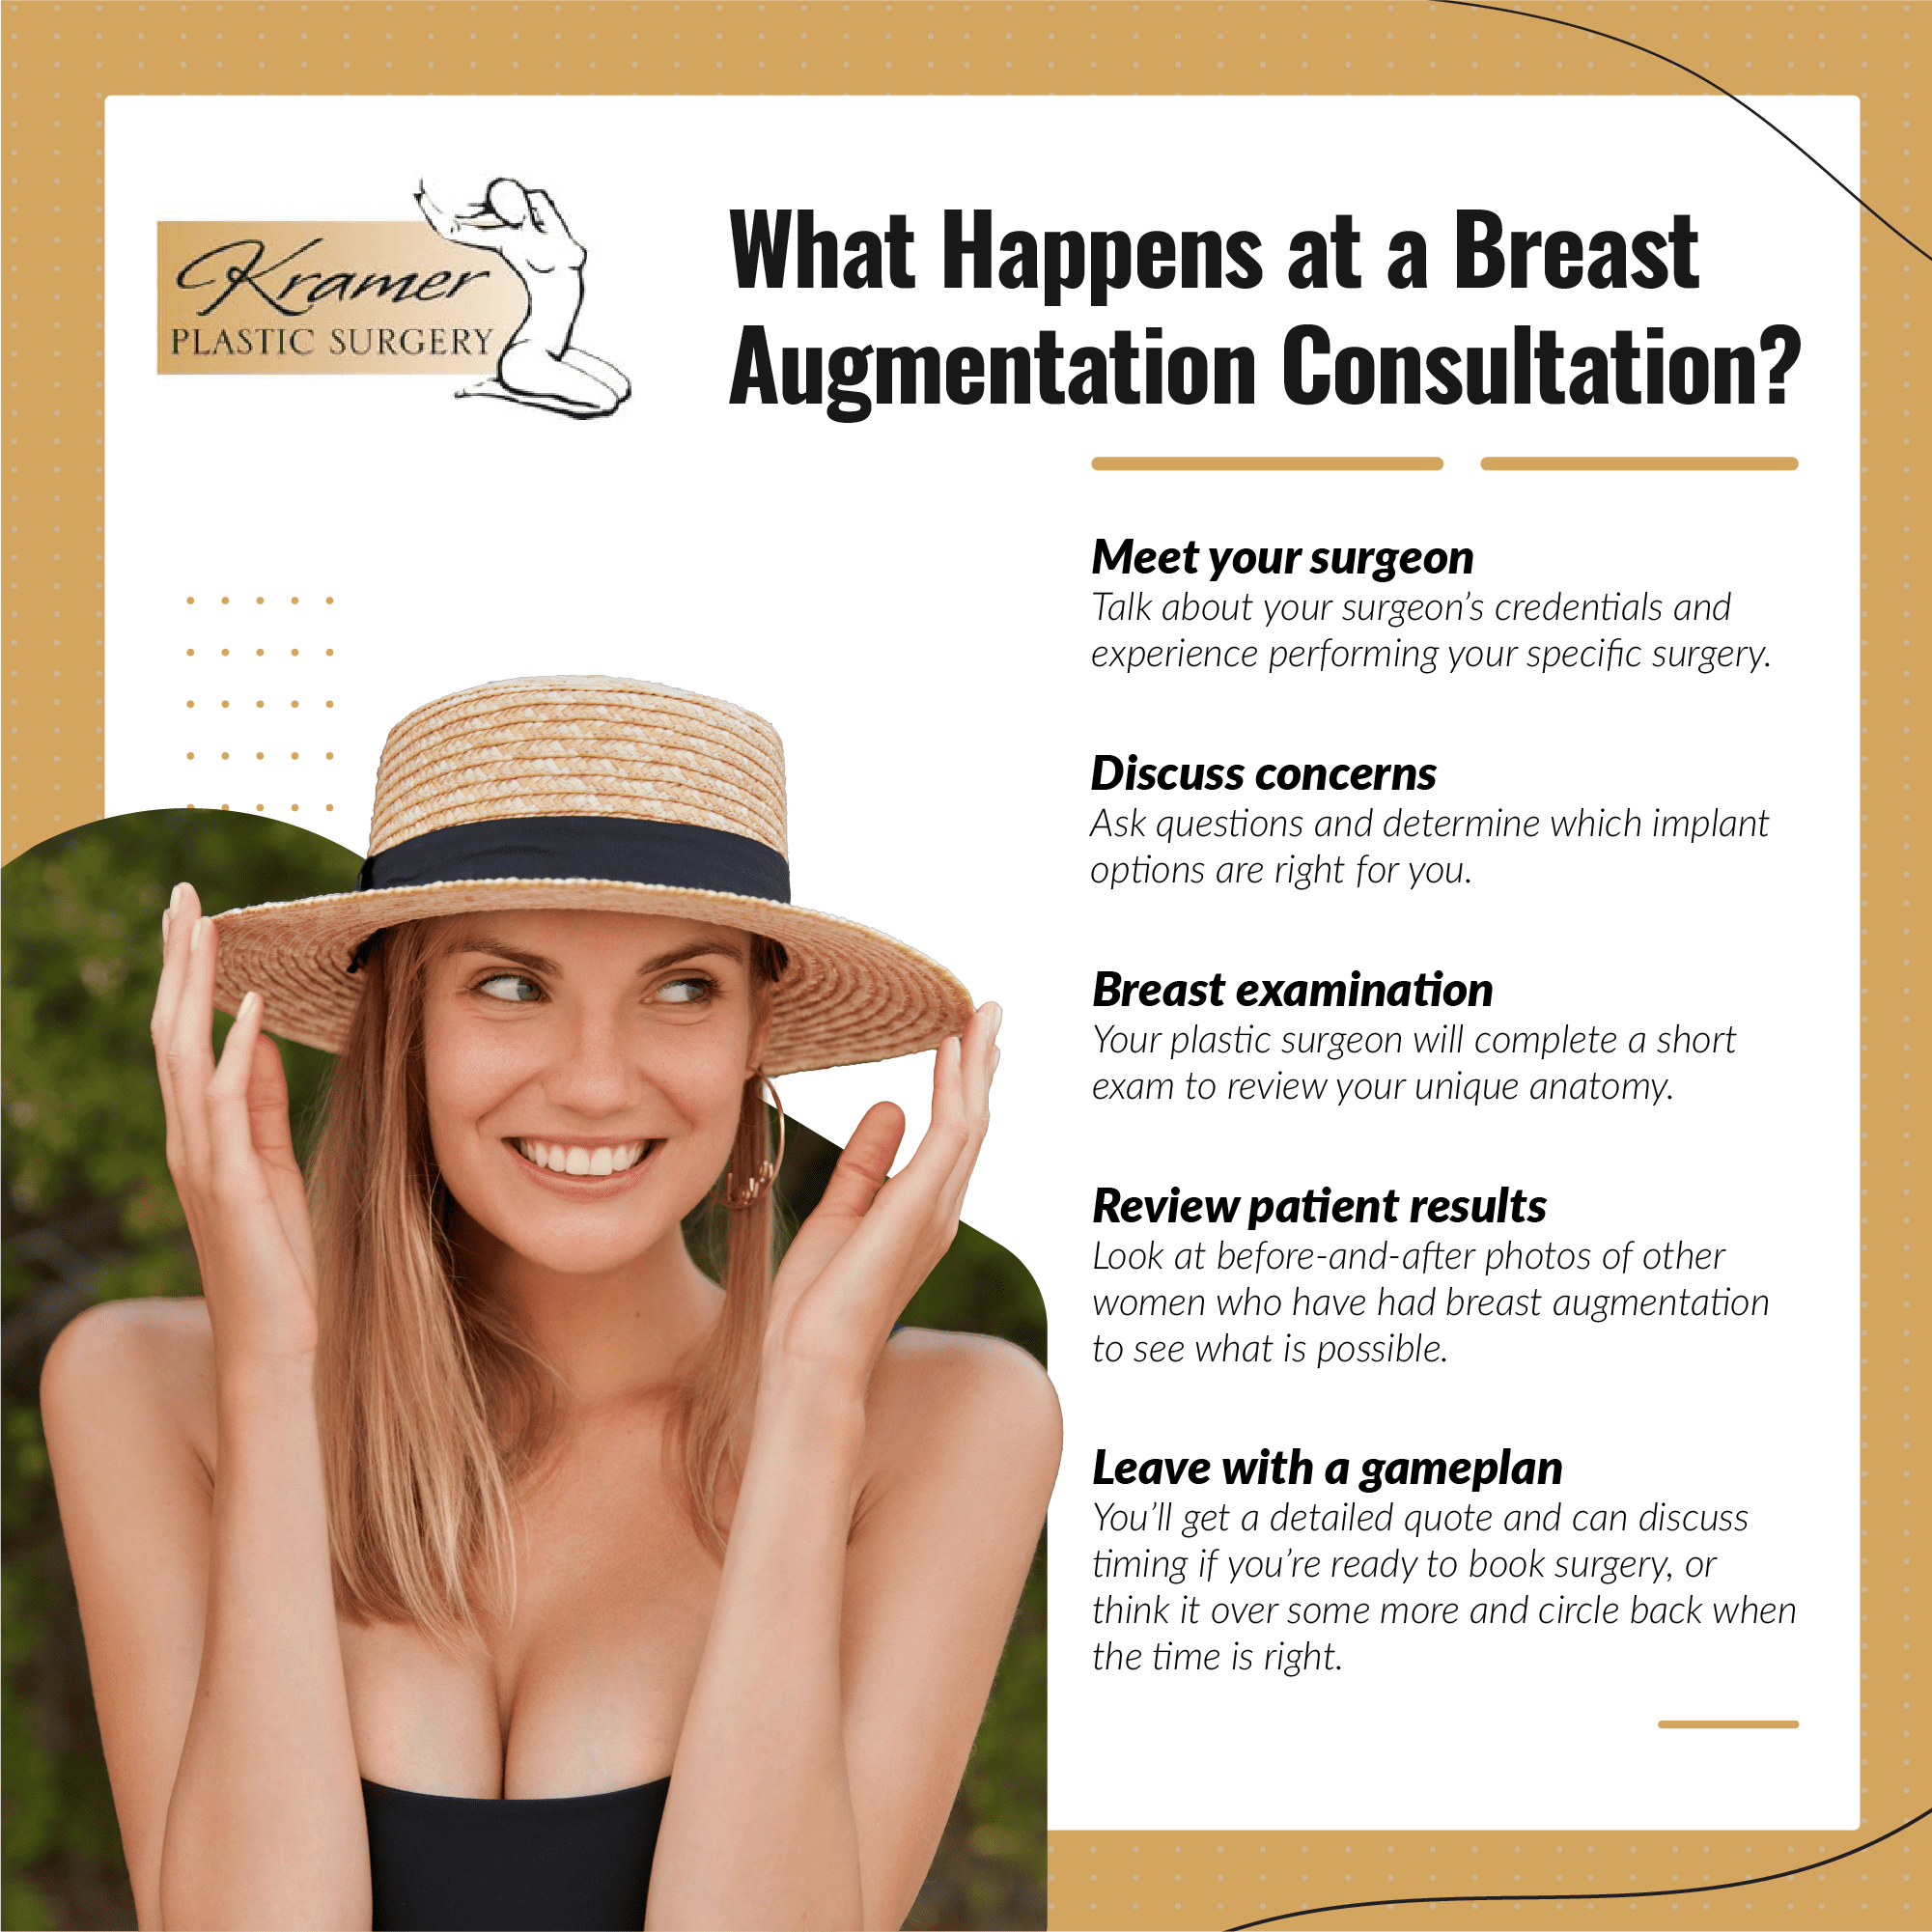 What Happens at a Breast Augmentation Consultation?